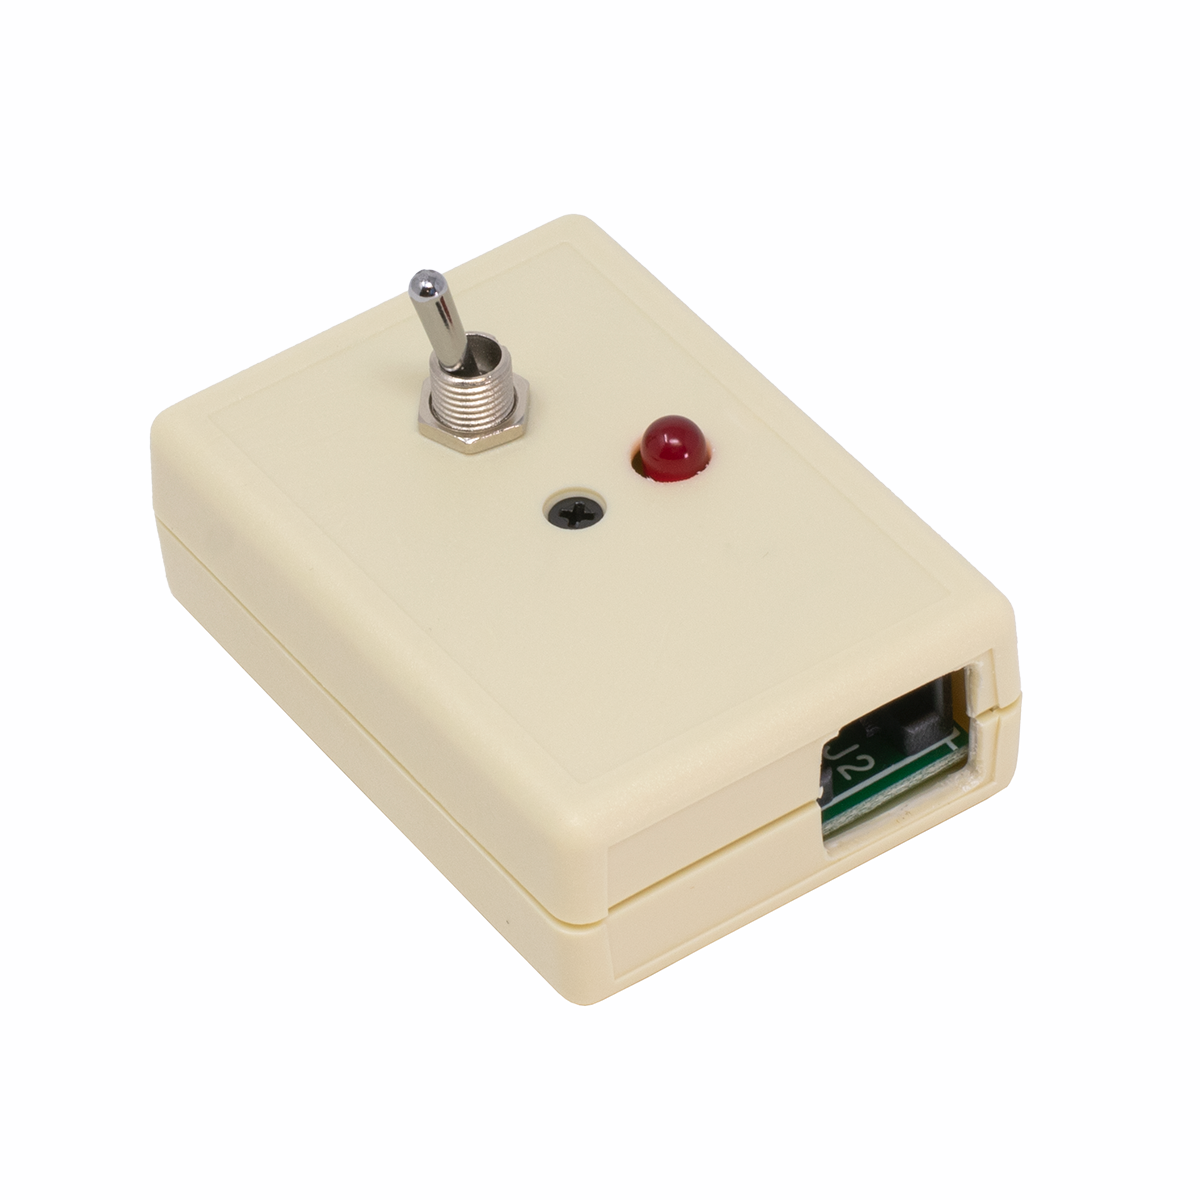 TKM-6 Modular 8-Pin Switch Top Mount Ivory w/LED (Top View)